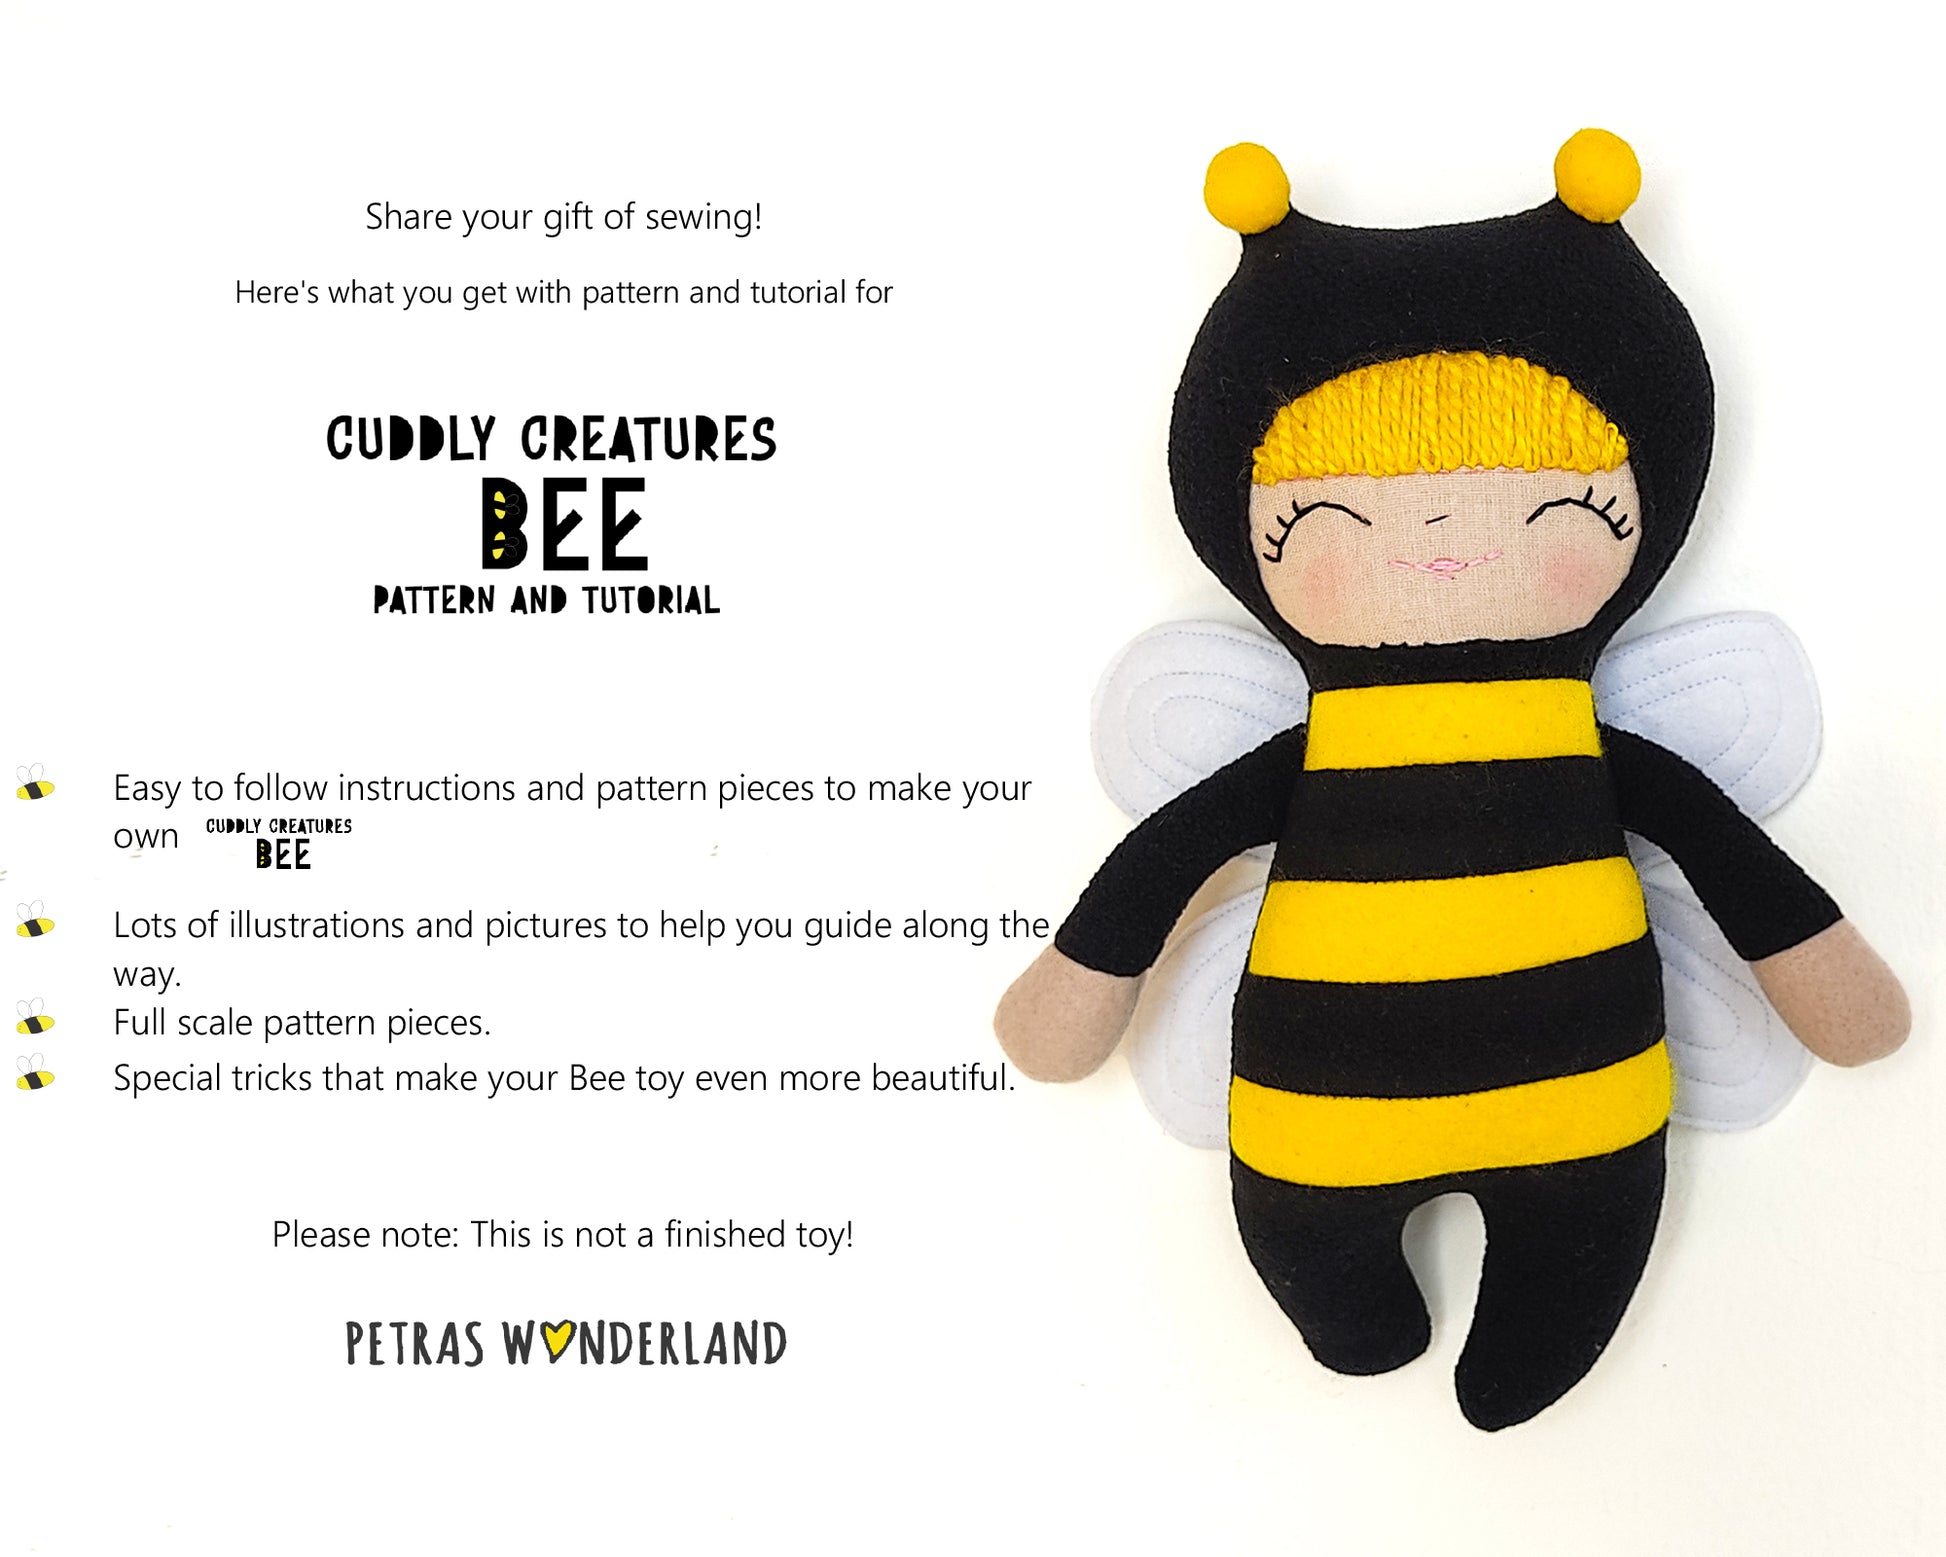 Cuddly Creatures Bee - PDF sewing pattern and tutorial 09